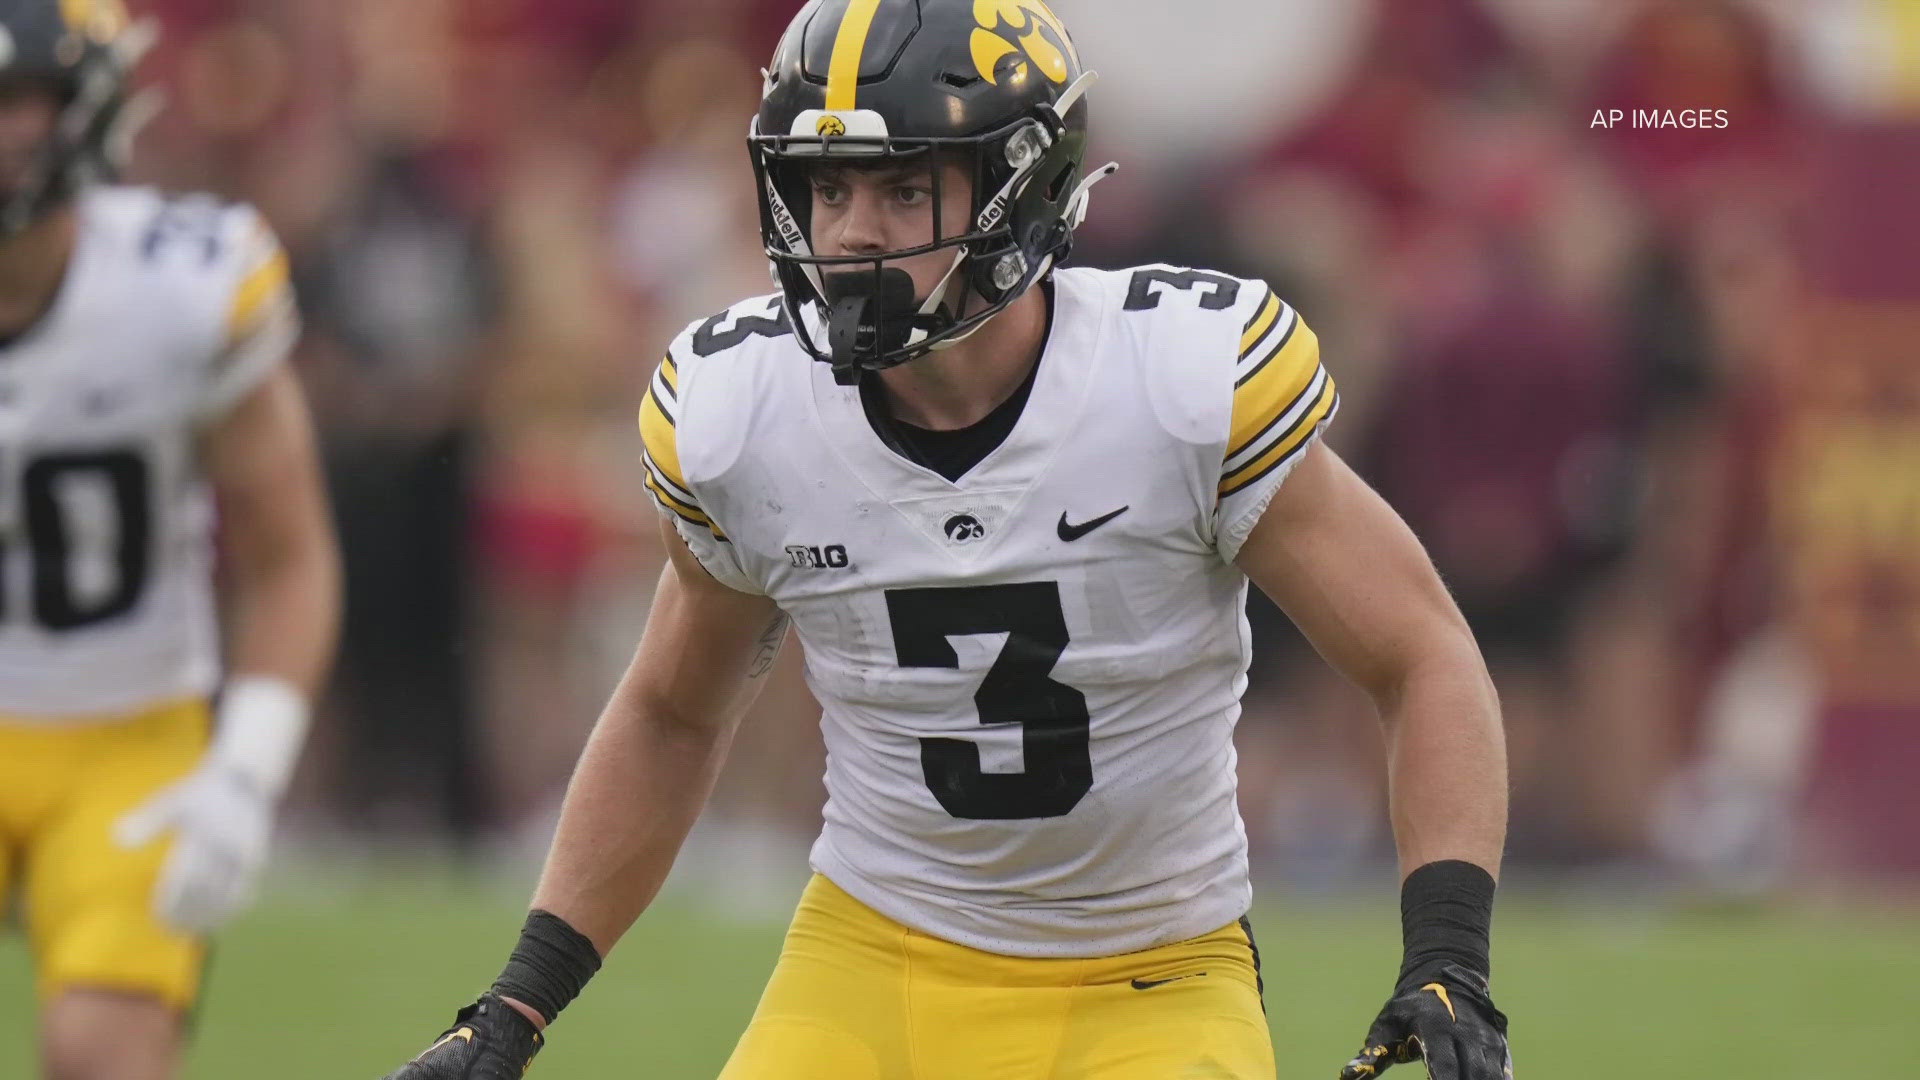 Cooper DeJean is widely seen as a first-round pick. He'll be another defensive player coming from Iowa City to the NFL.